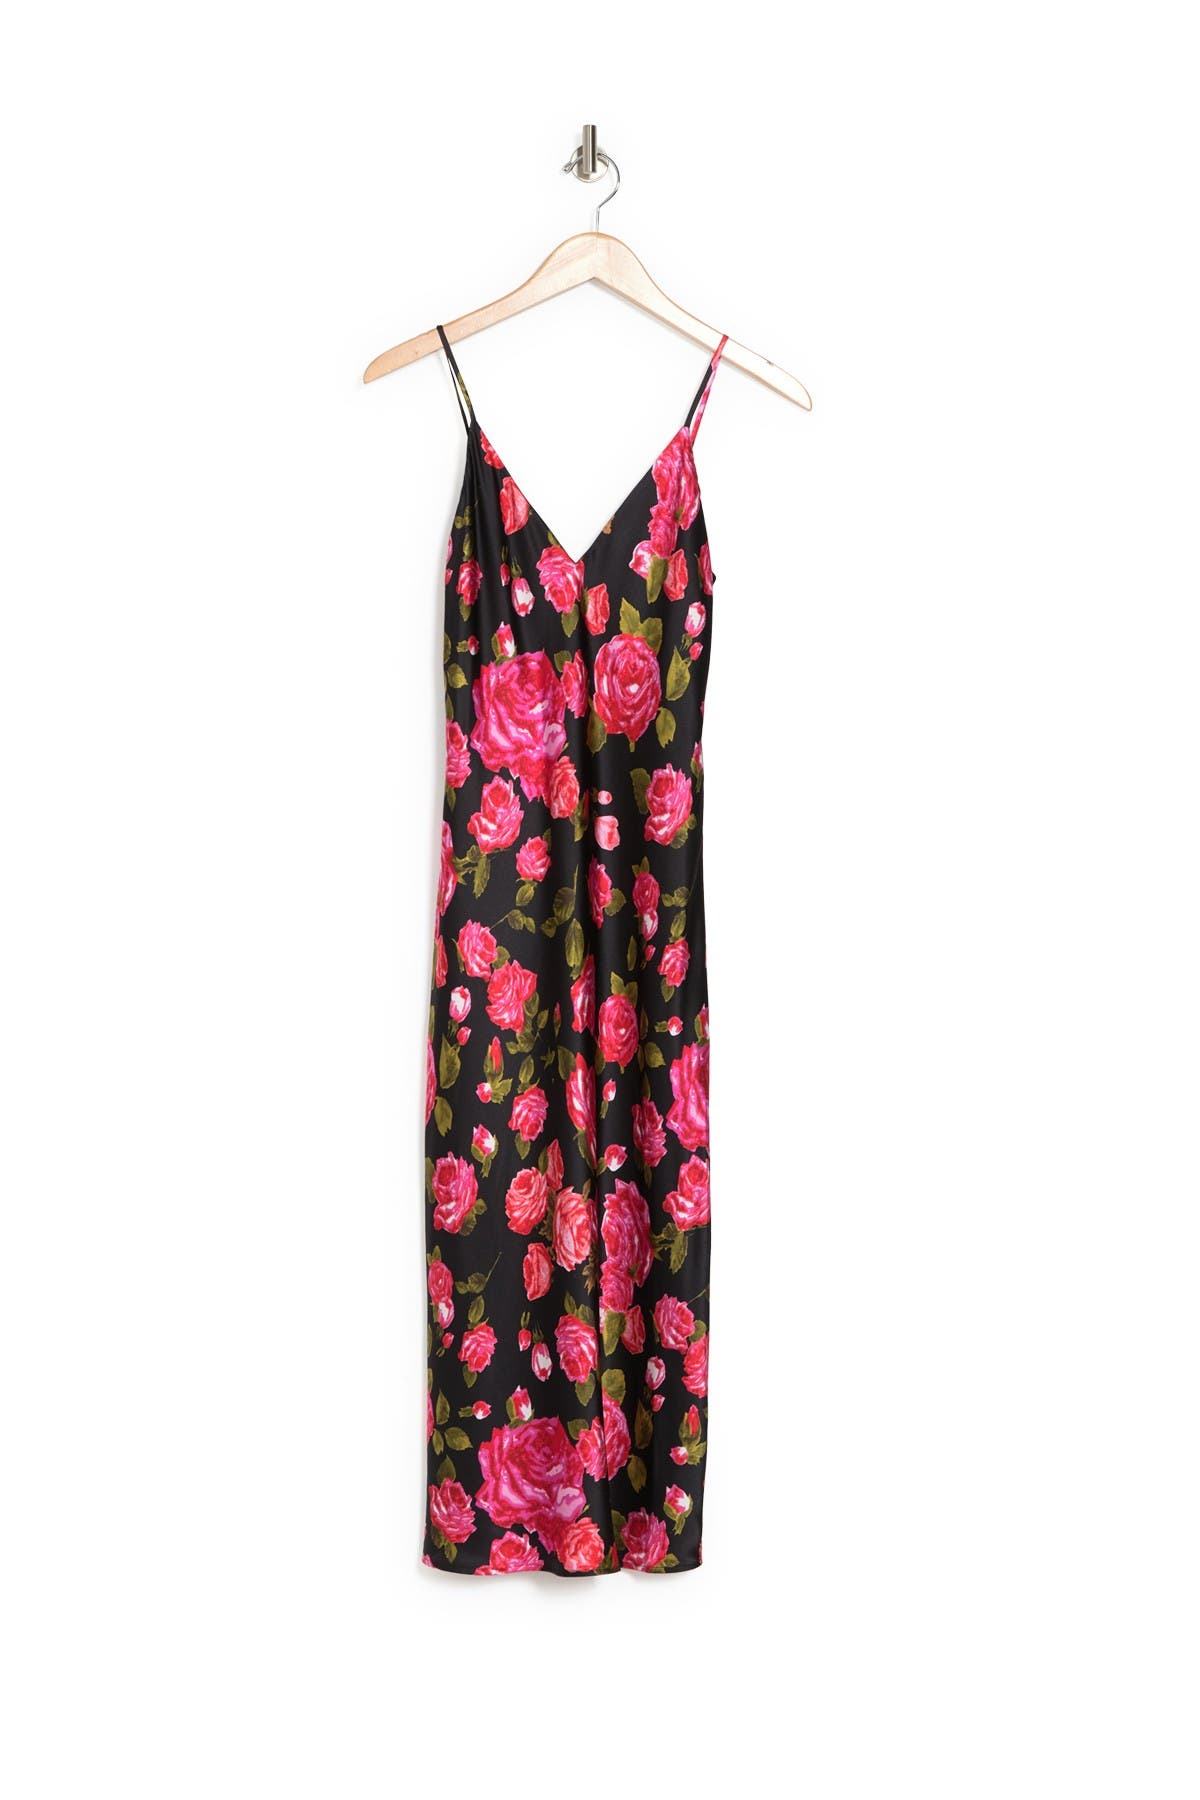 L Agence Jodie Floral Slip Dress In Open Miscellaneous